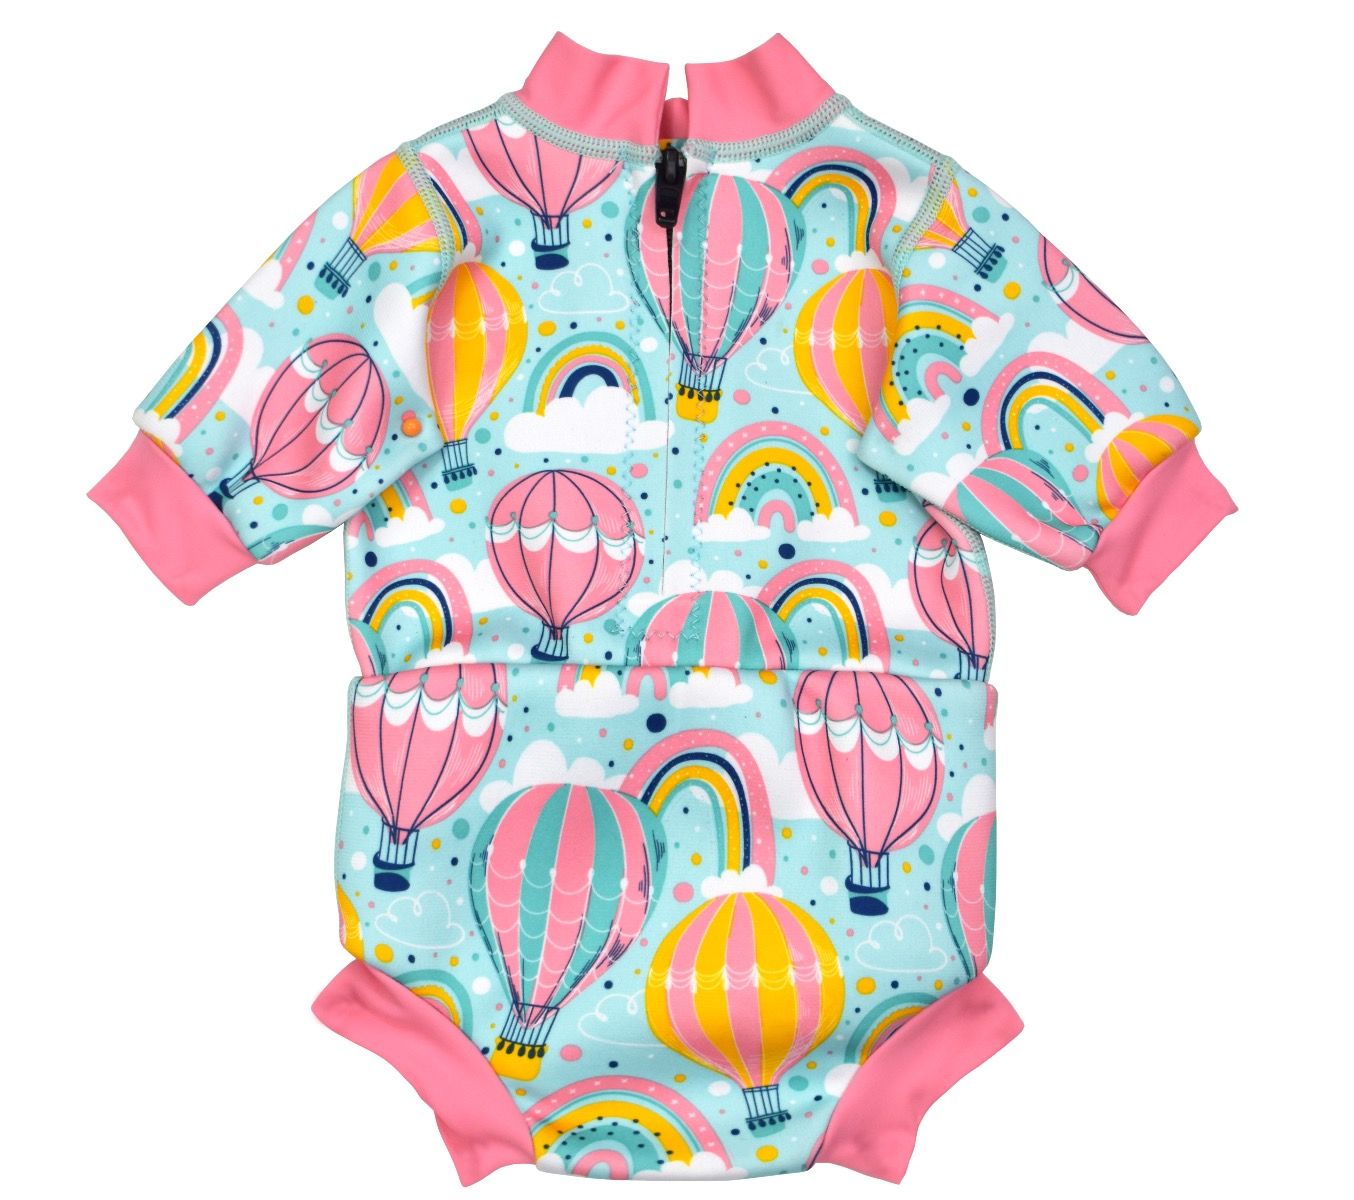 Baby wetsuit with built in swim nappy in baby blue with pink trims and hot air balloons themed print, including rainbows and clouds. Back.